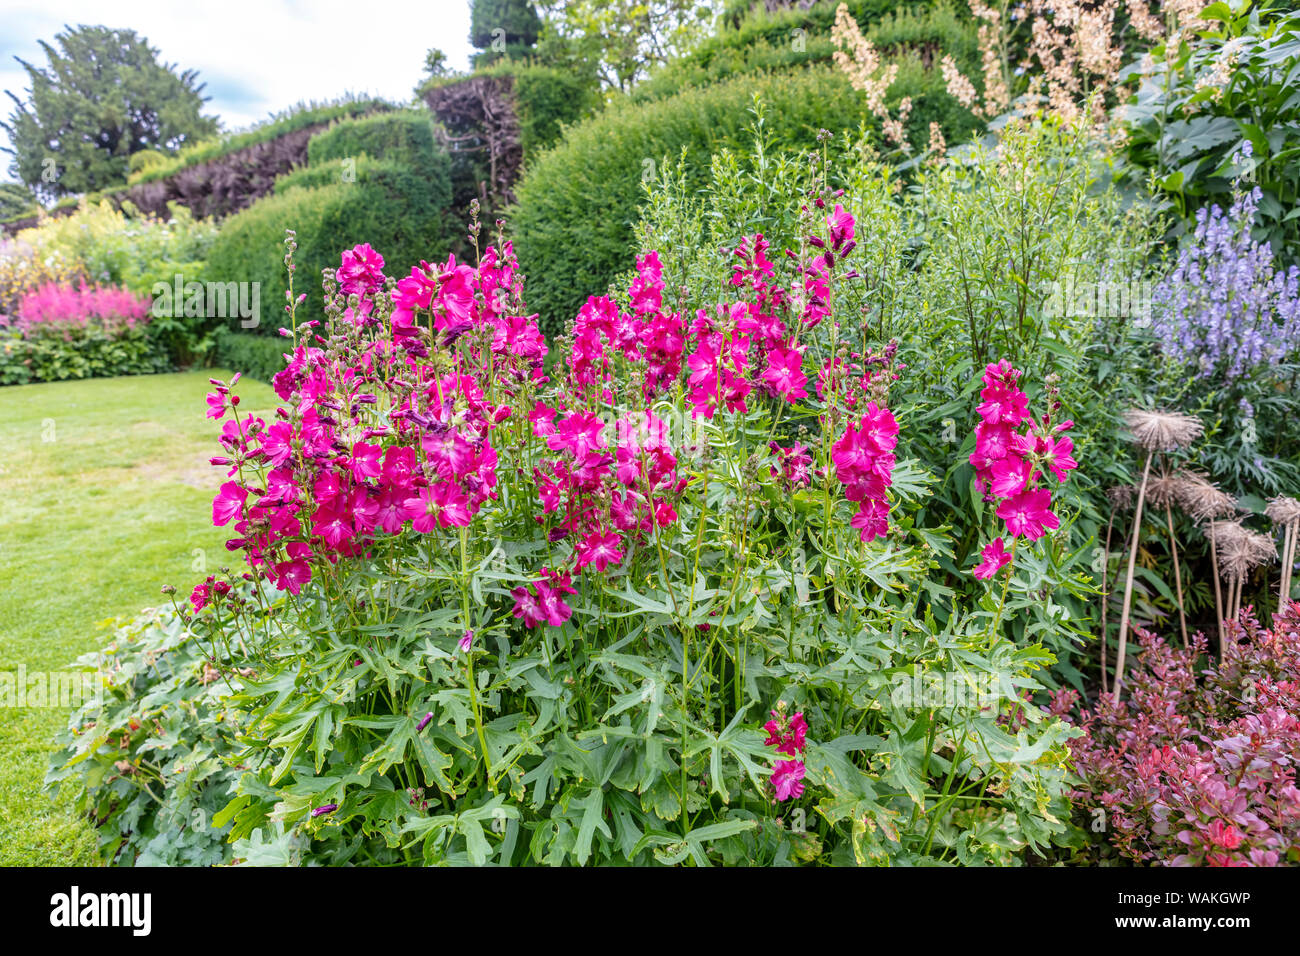 Upright flower spikes carrying rose-pink blooms of Sidalcea hybrida 'Party Girl' in a herbaceous border of an English garden. Stock Photo